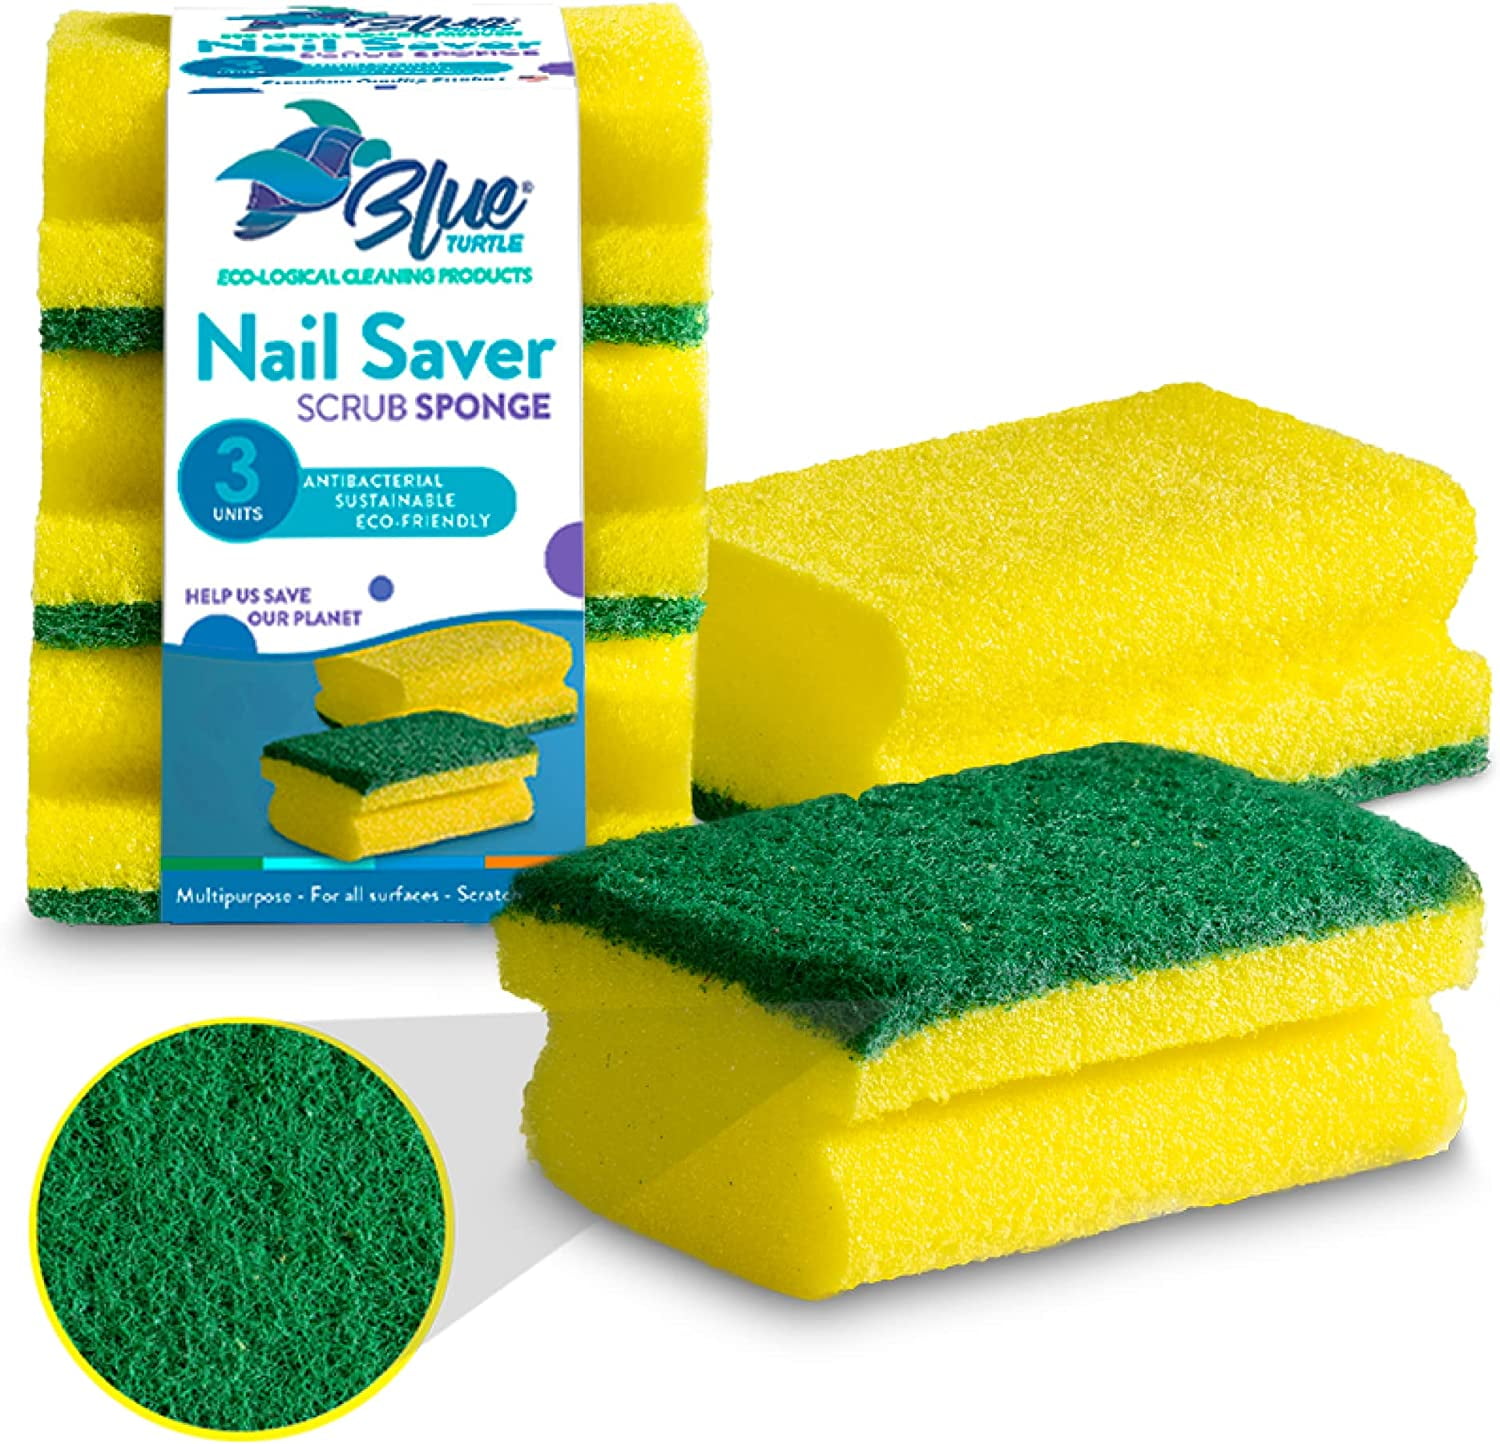 Scrub sponge, Brushes and cleaning sponges, Cleaning, Care, Aids, Labware